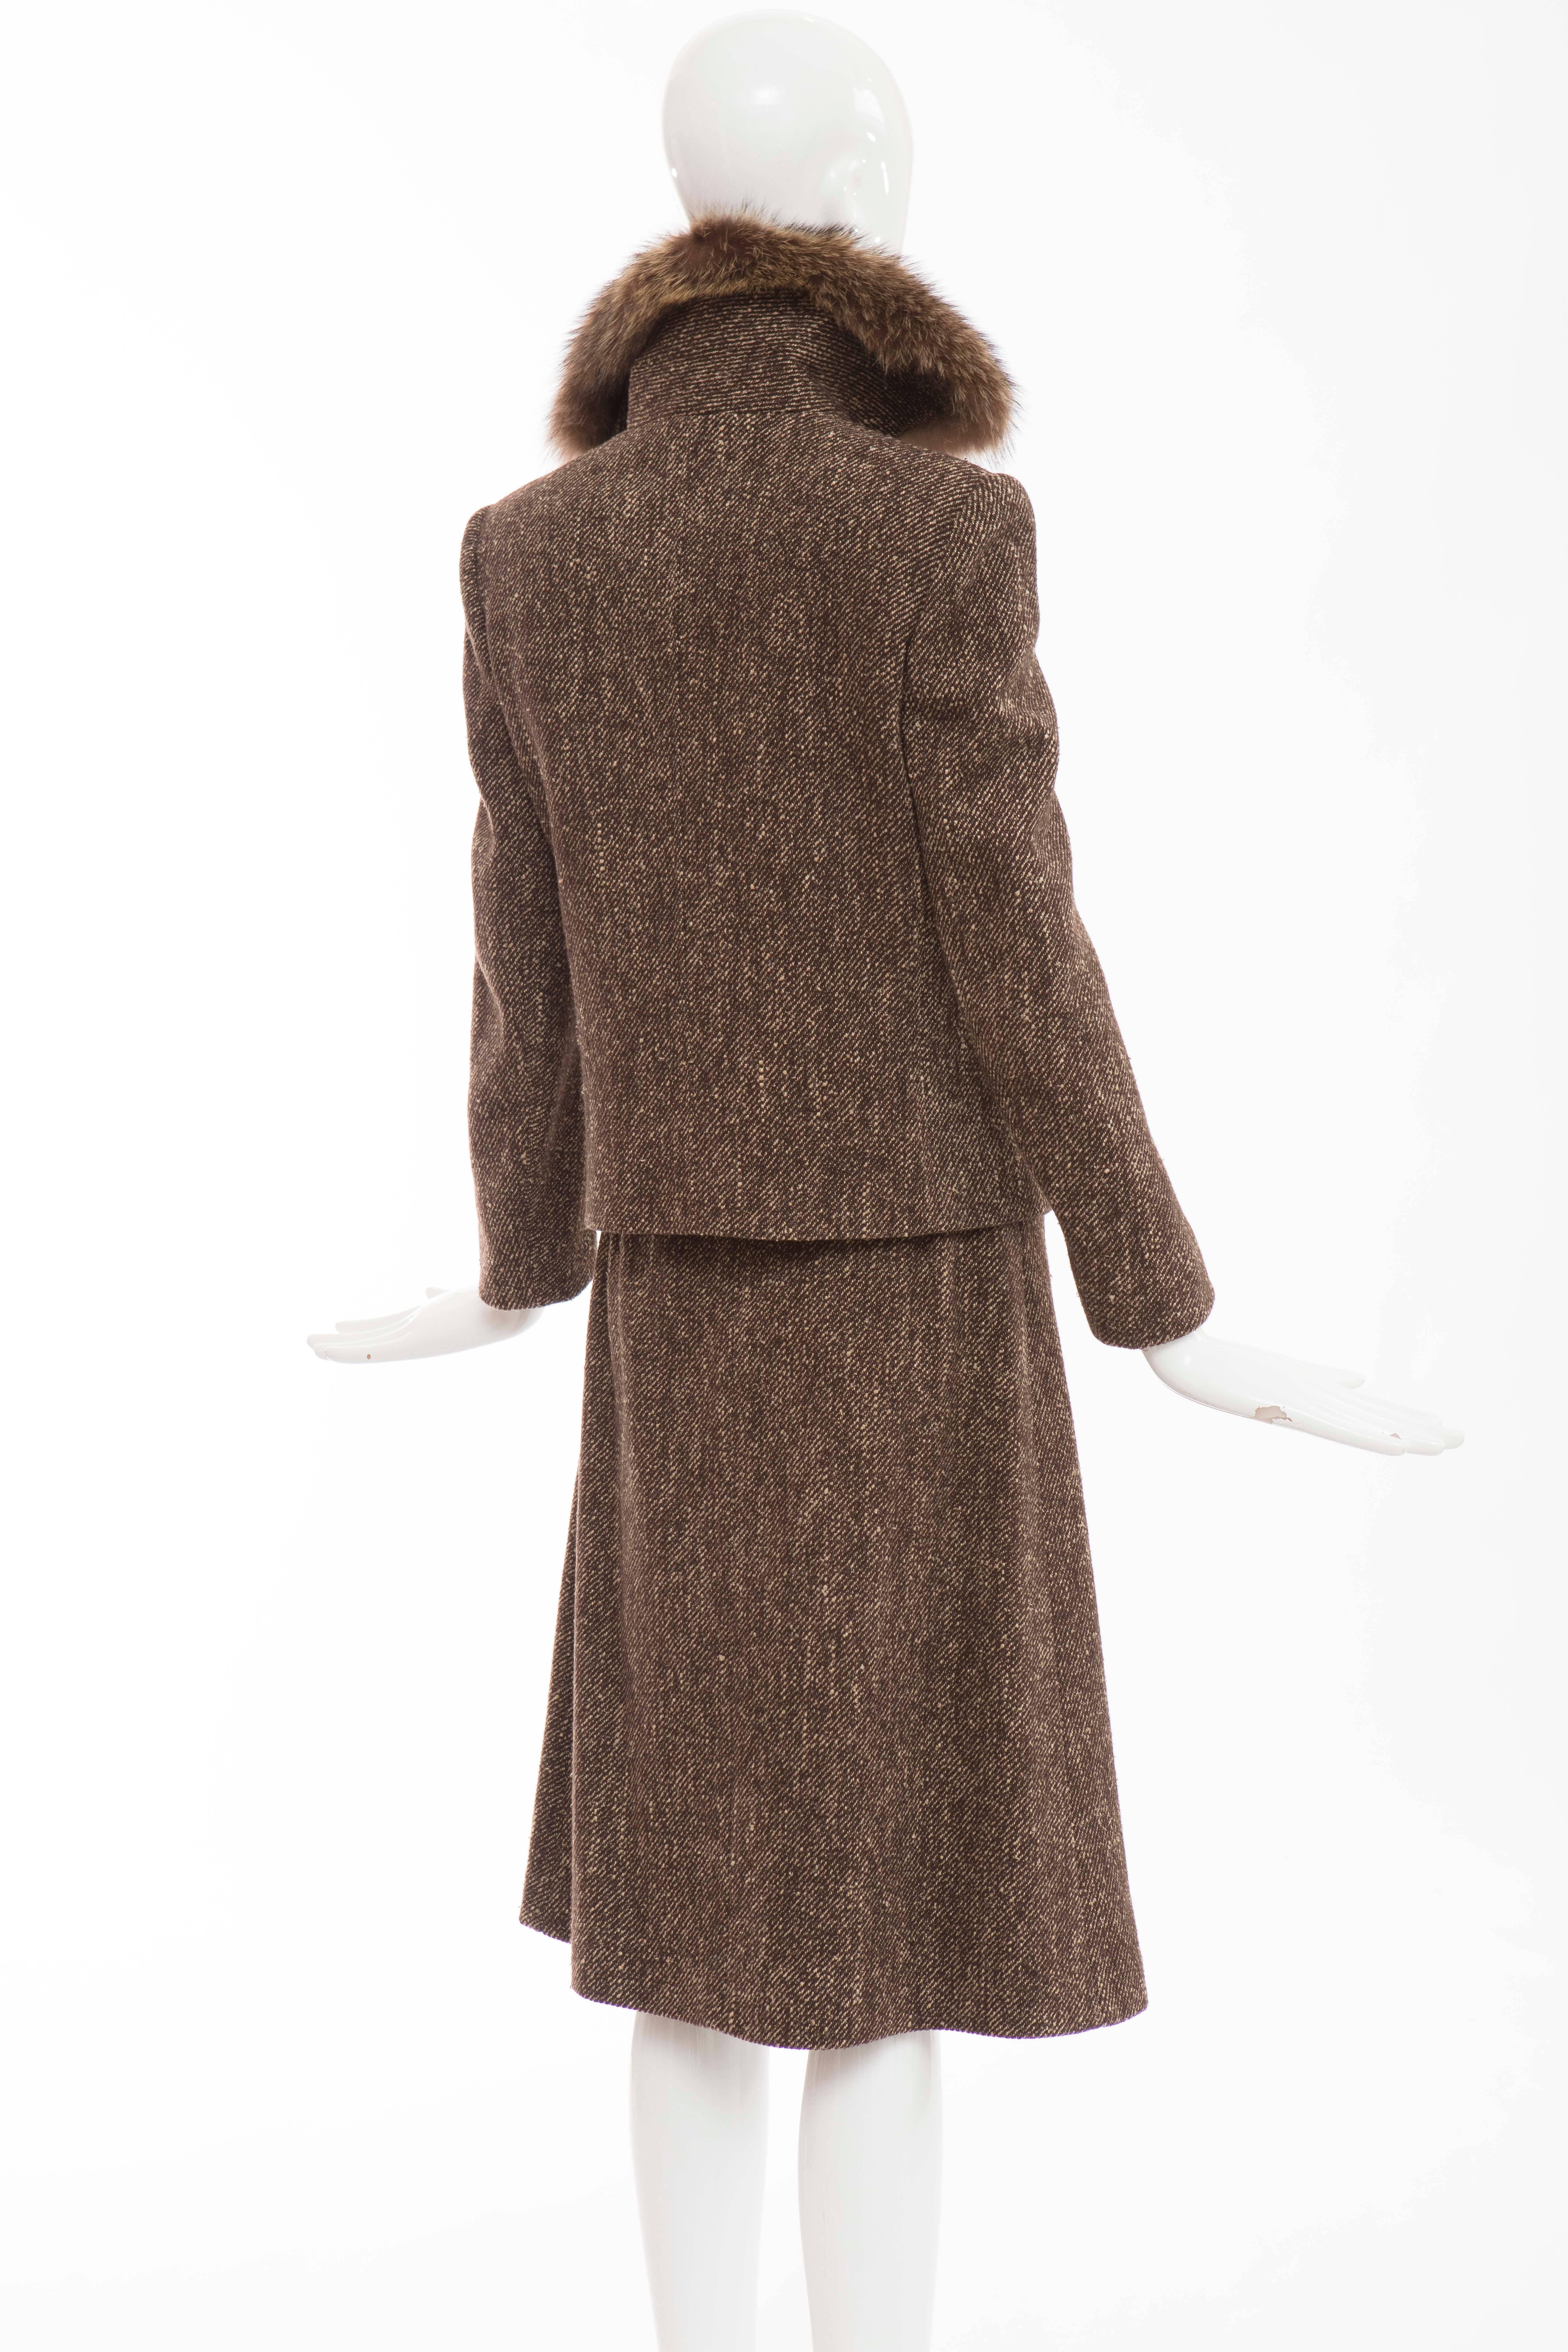 Women's Dolce & Gabbana Brown Tweed Skirt Suit With Fur Collar For Sale